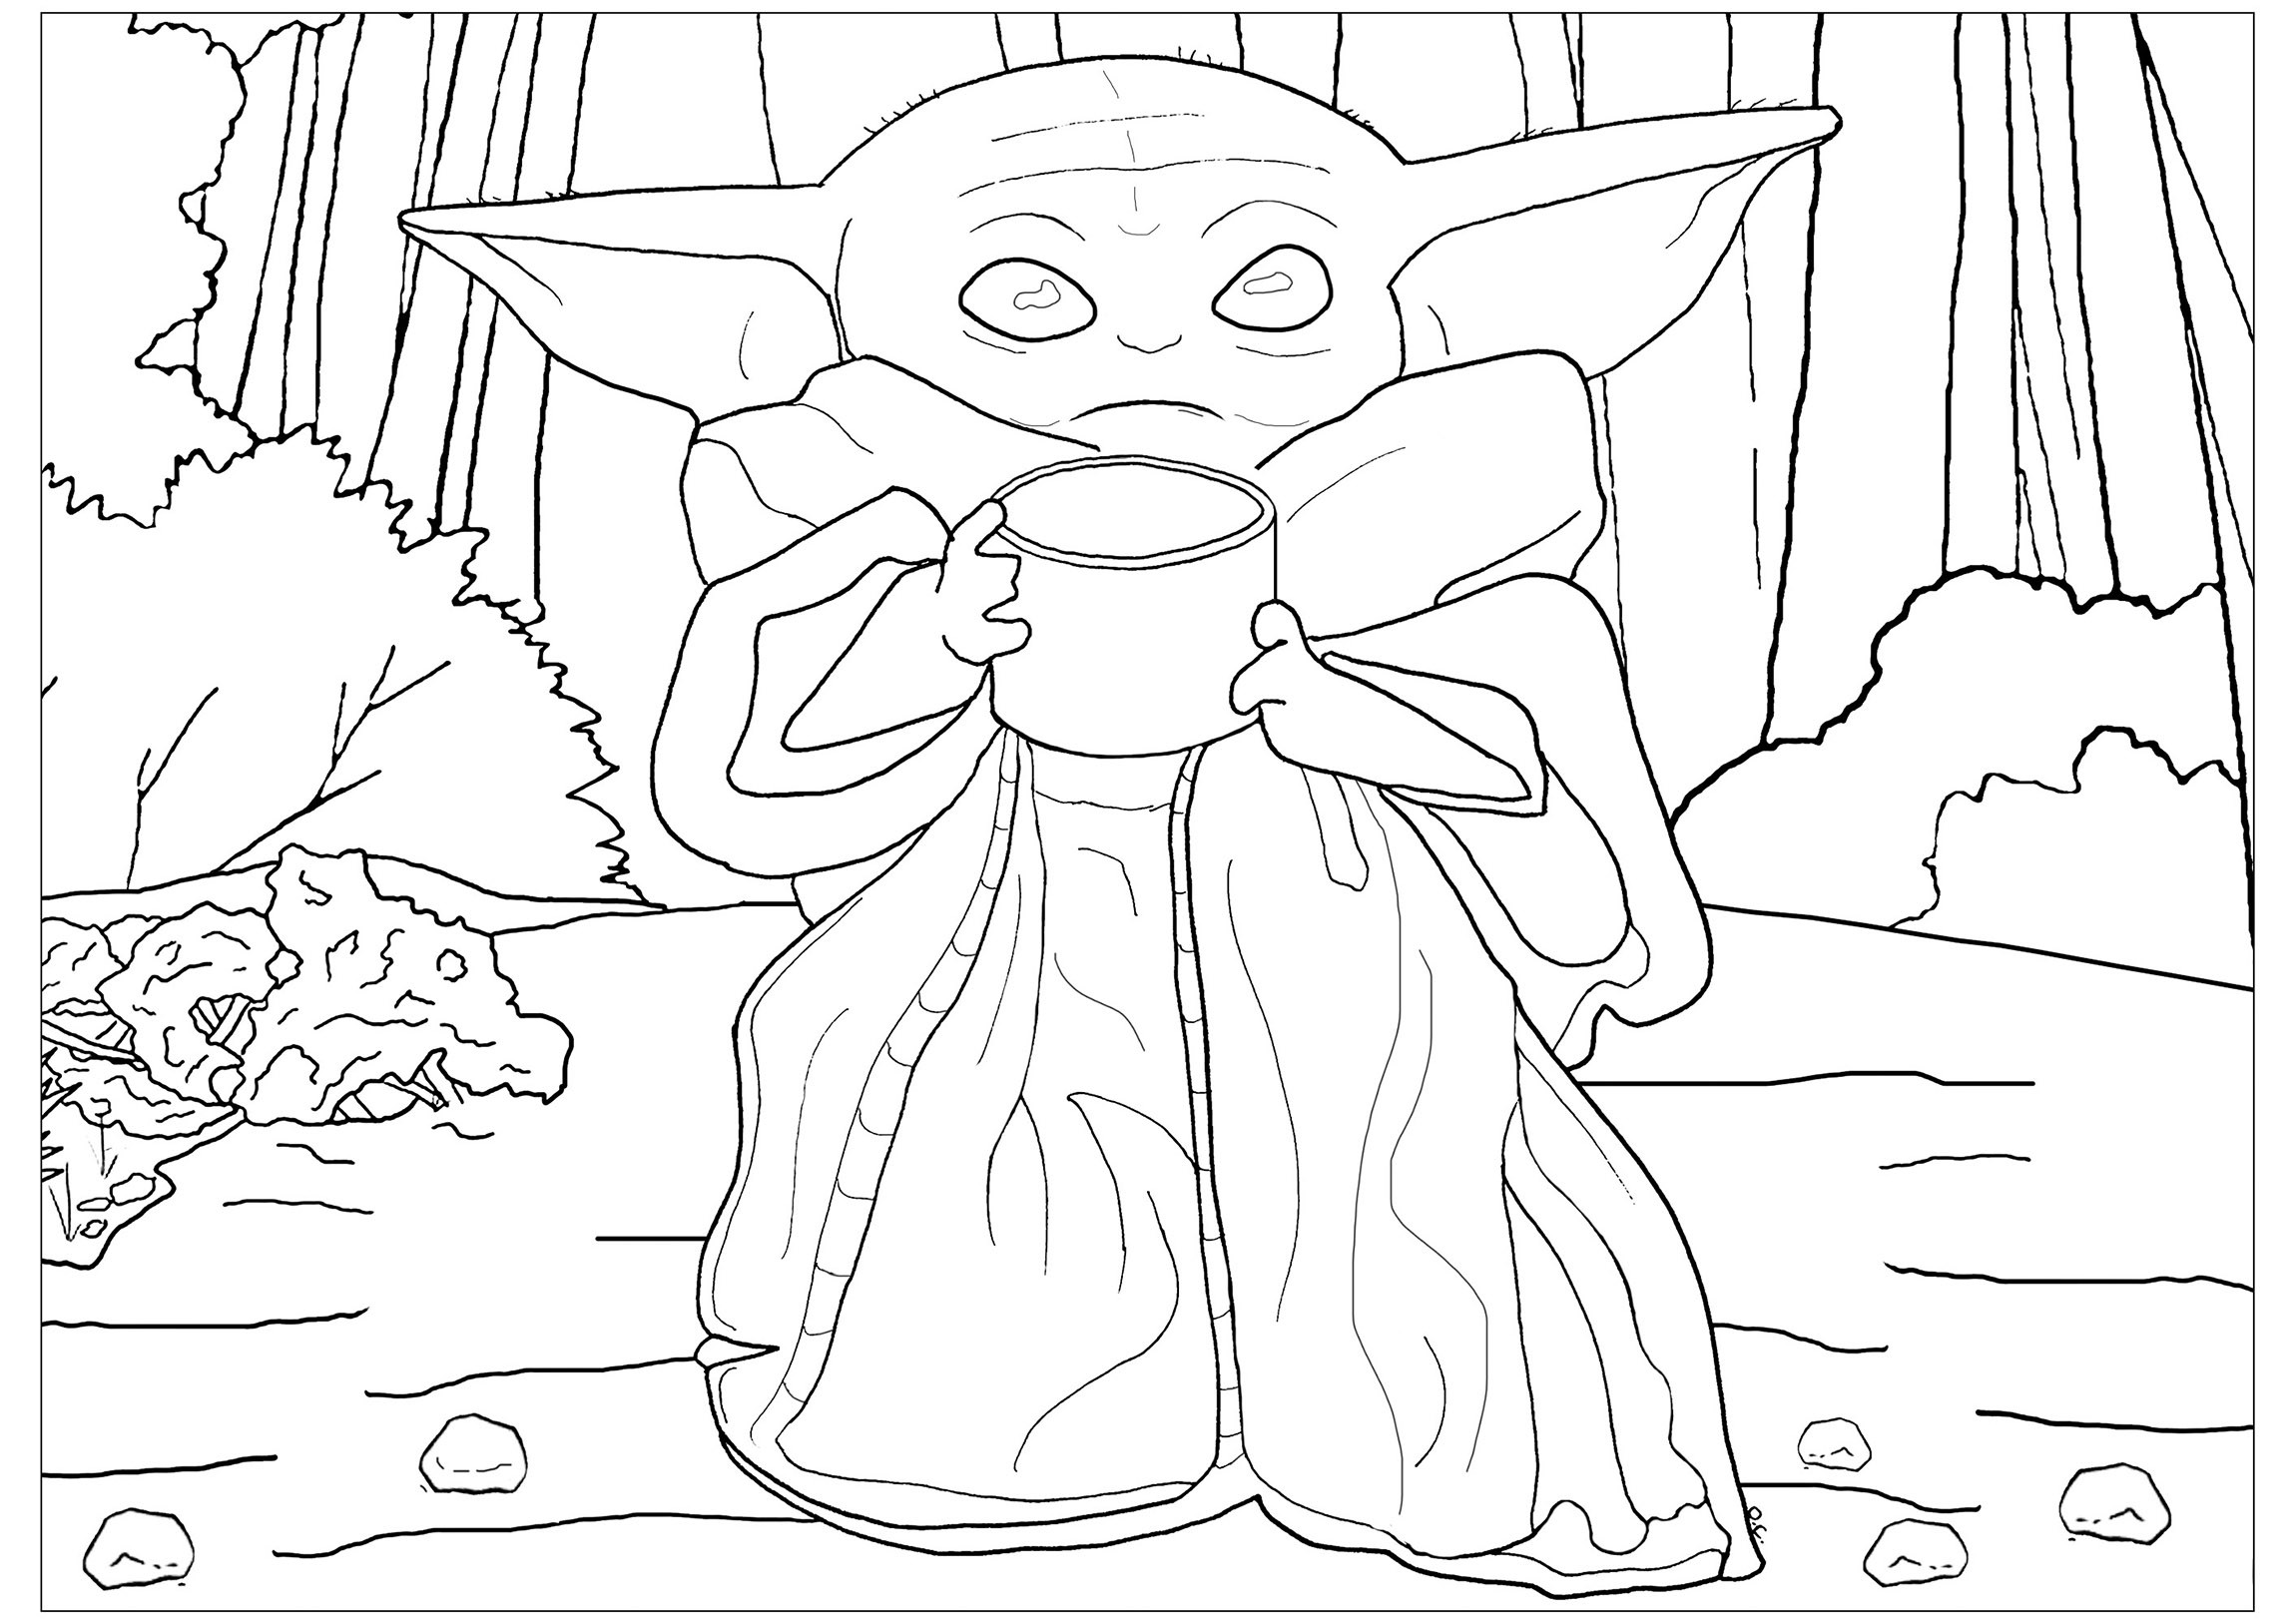 Star Wars Coloring Pages For Kids
 Star wars free to color for children Star Wars Kids